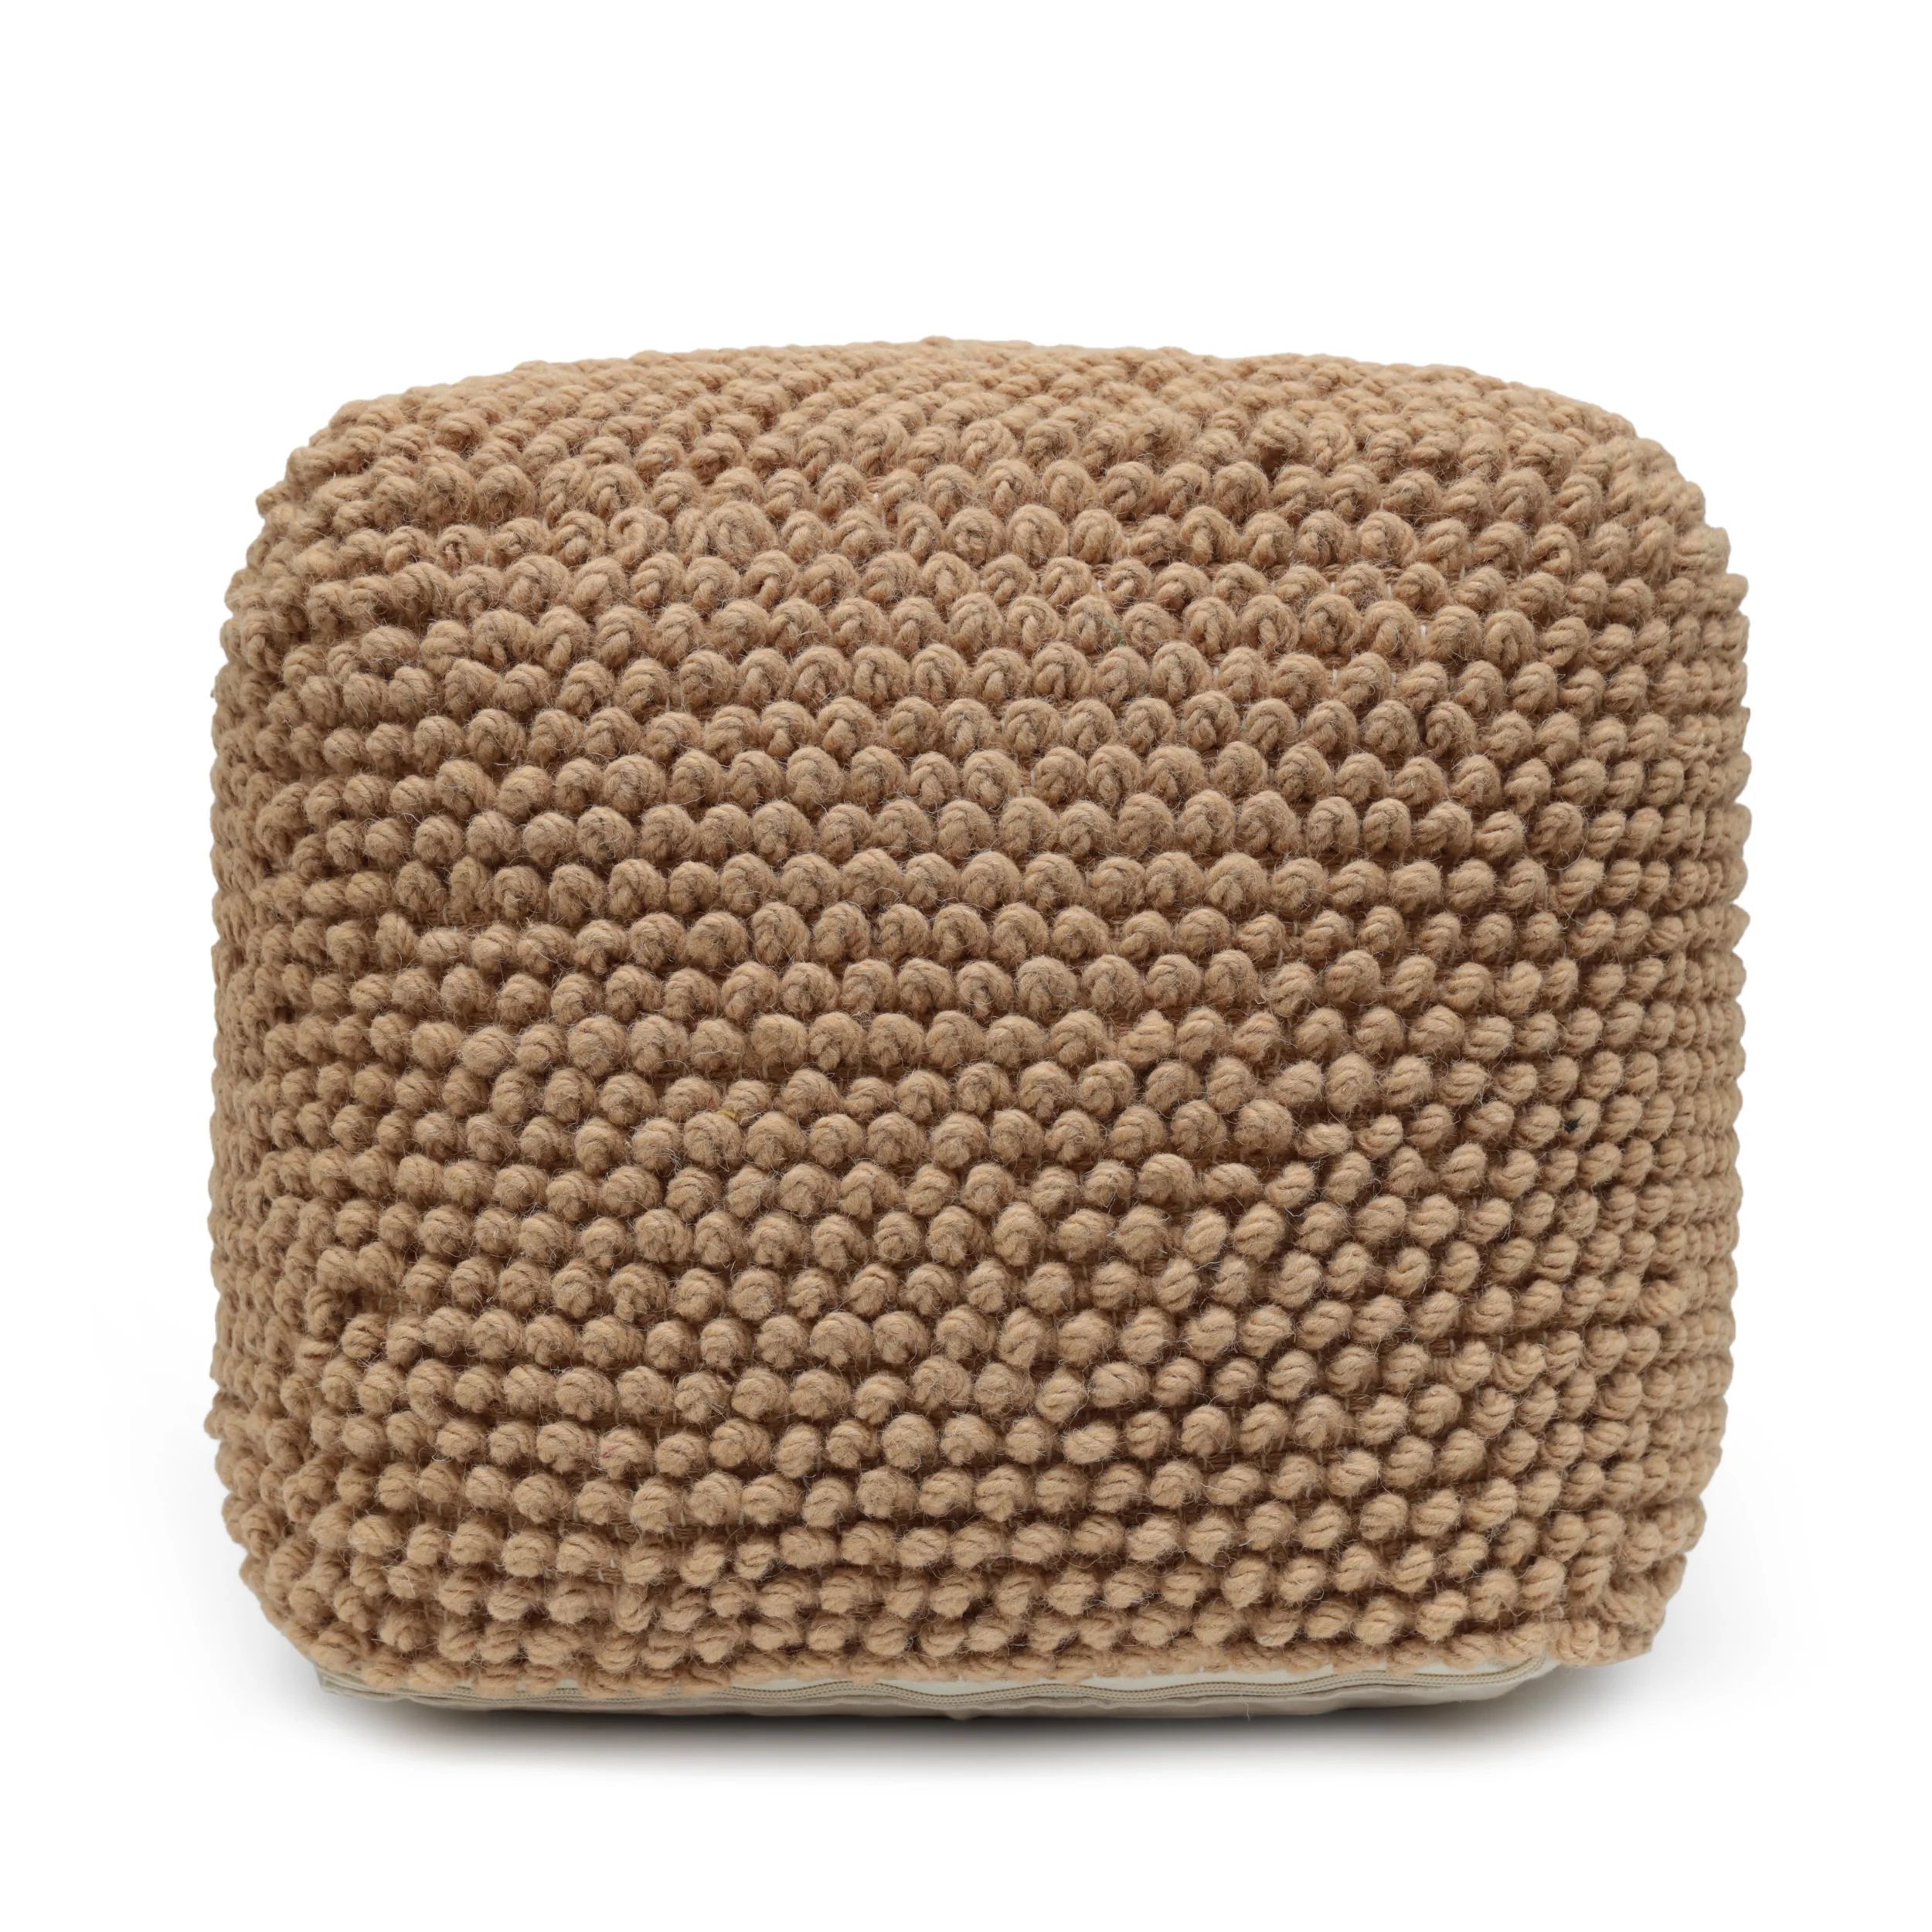 Woven Paths Grewell Wool Tufted Cube Pouf, Natural | Walmart (US)